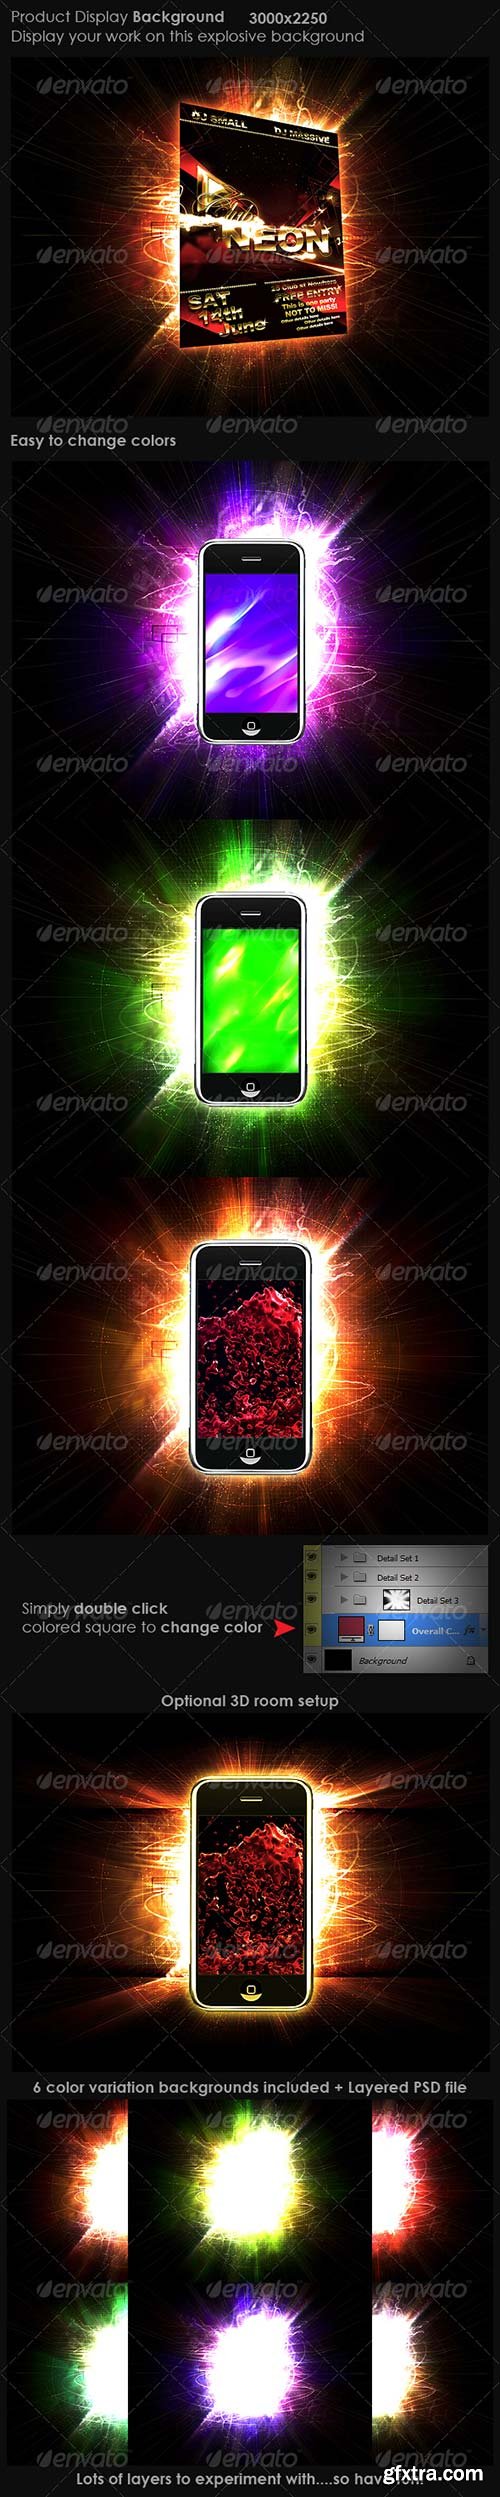 GraphicRiver - Product Display Background 1